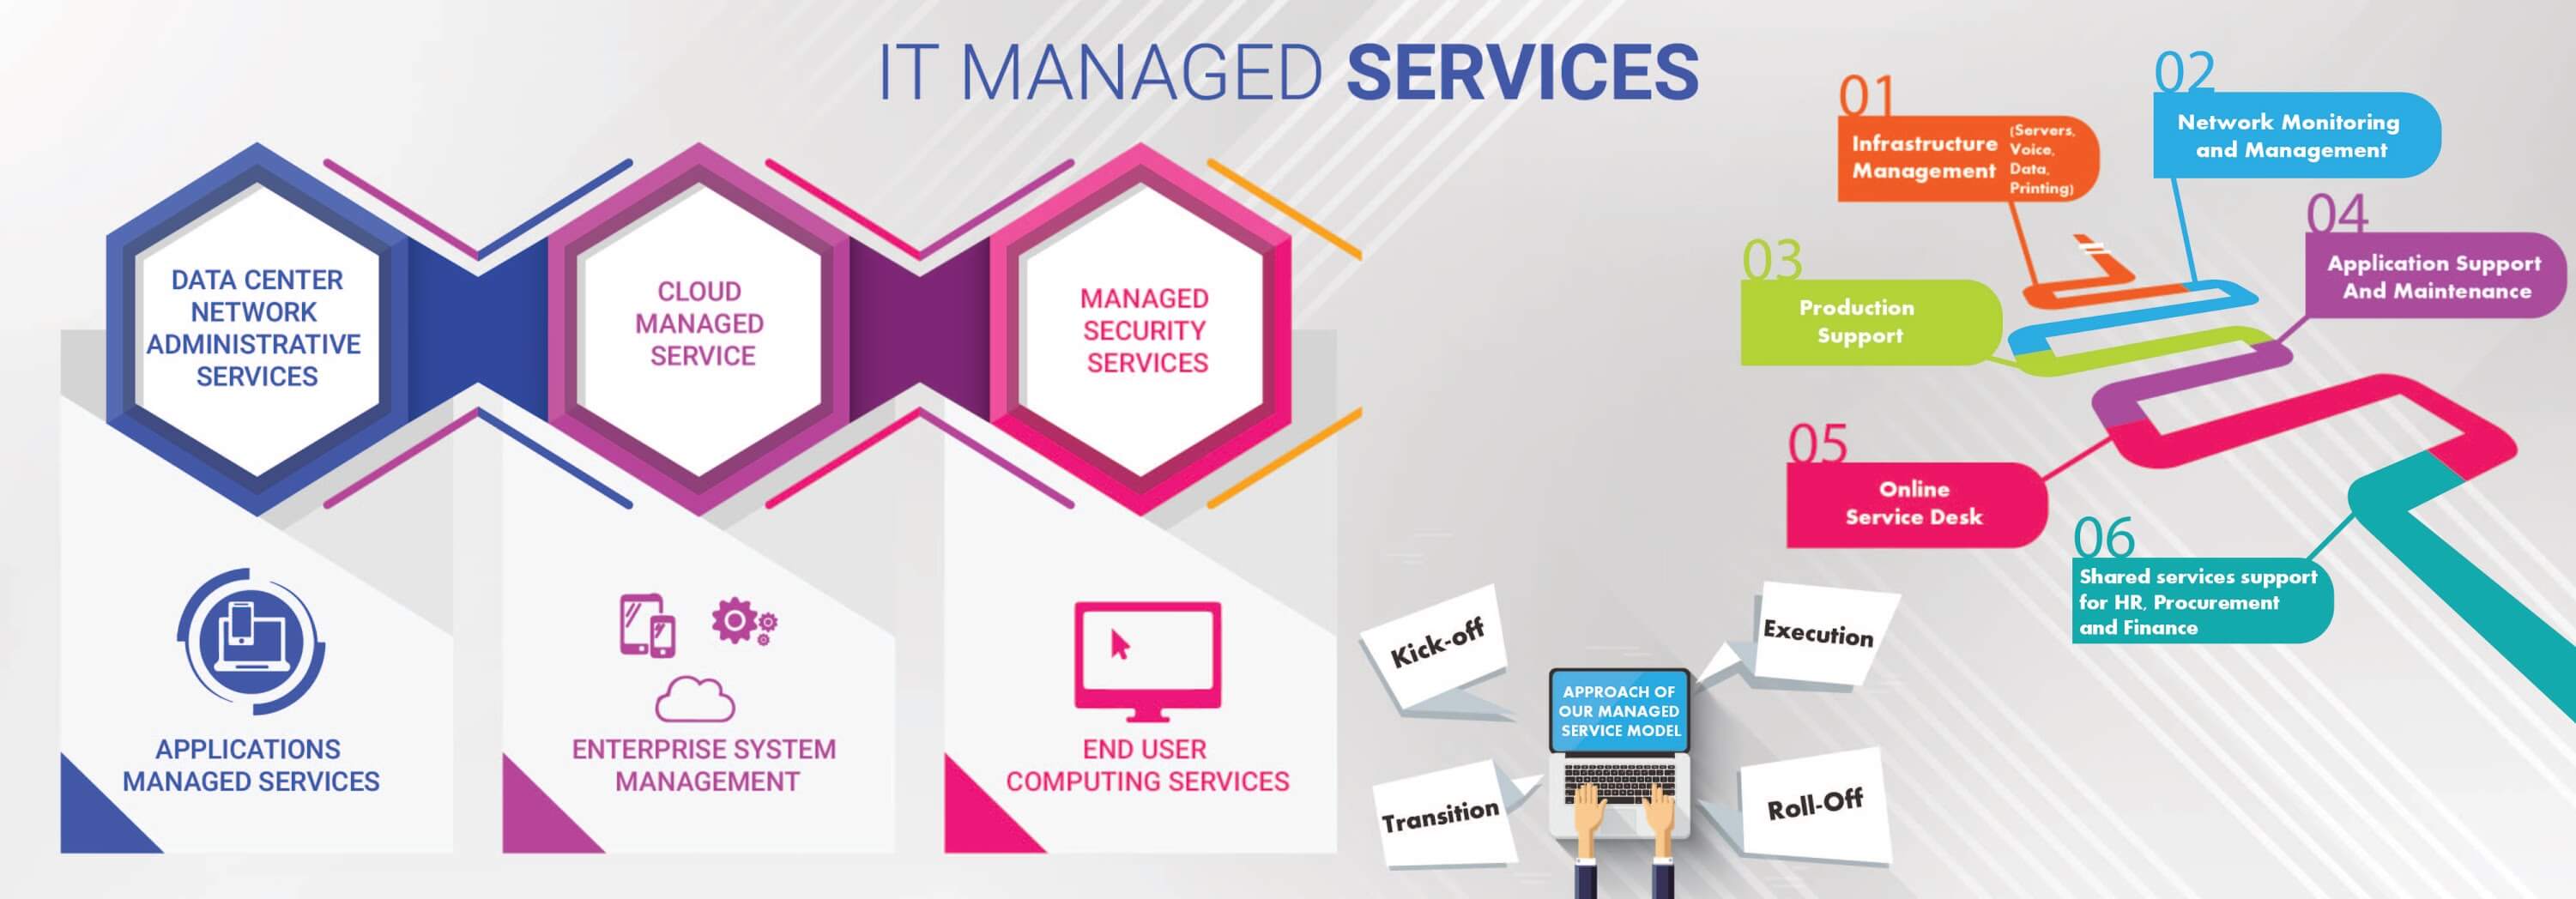 It Managed Services Approaches Benefits Managed Services It